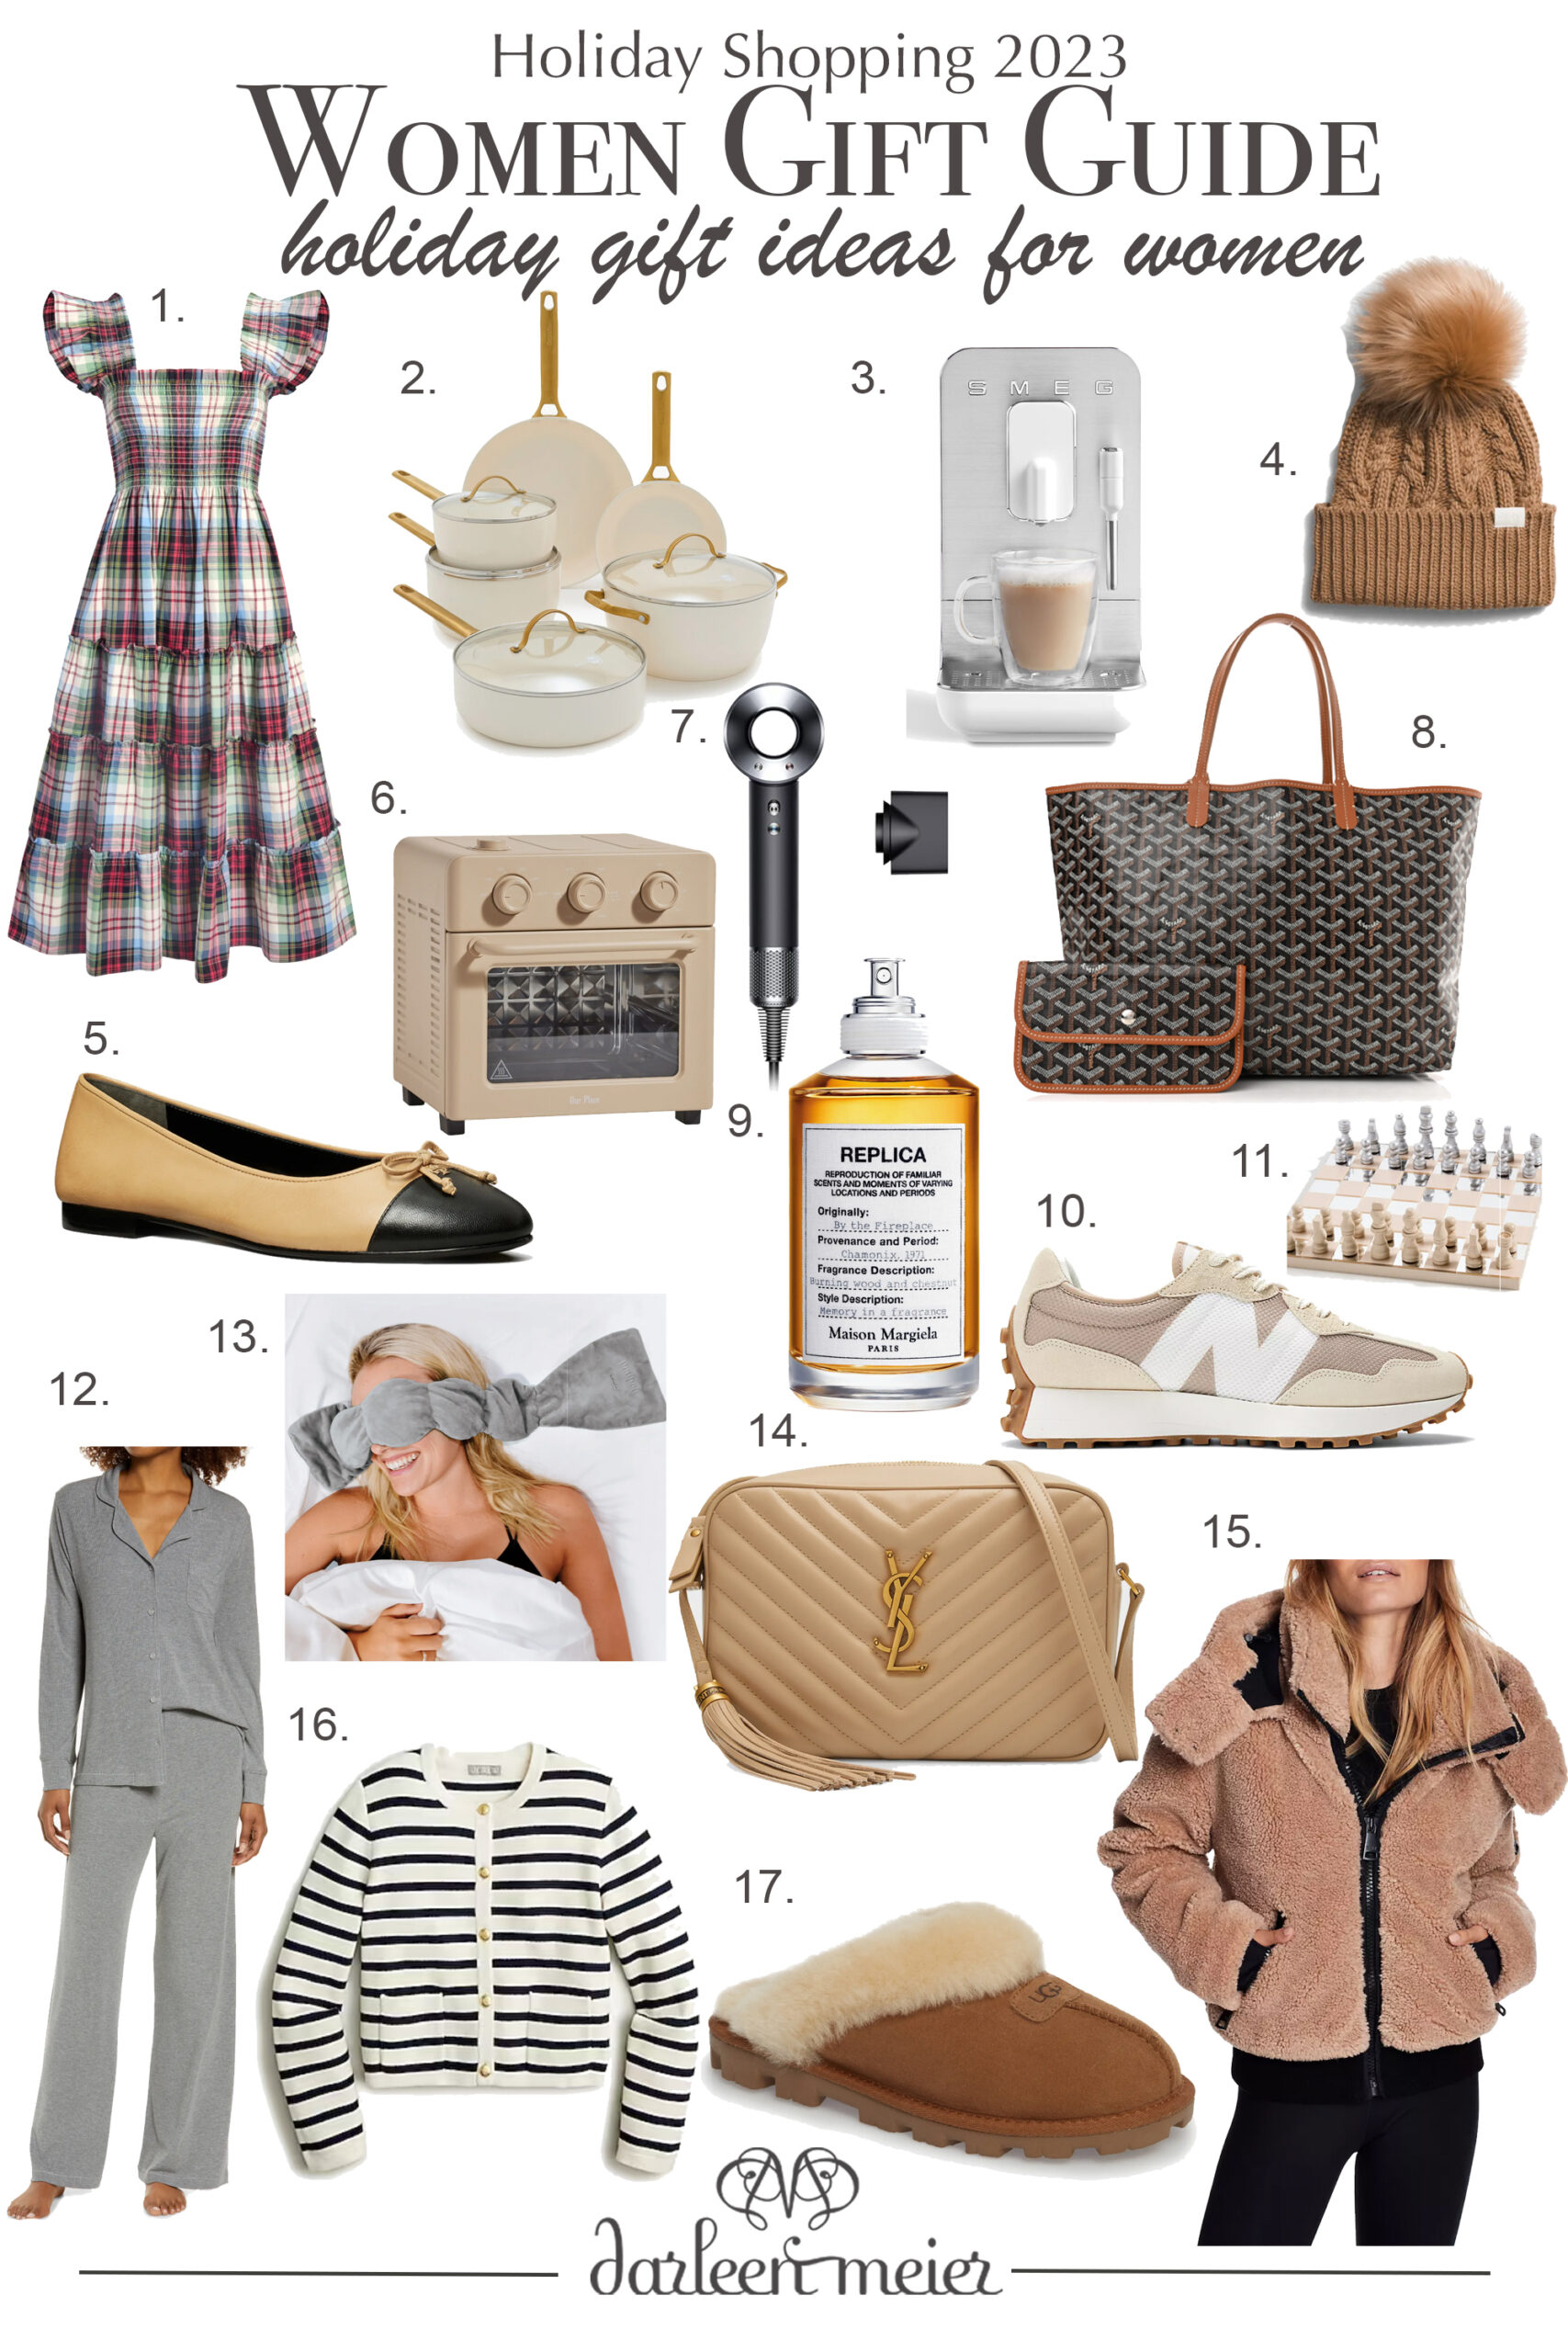 Women's Holiday Gift Guide - The Buy Guide